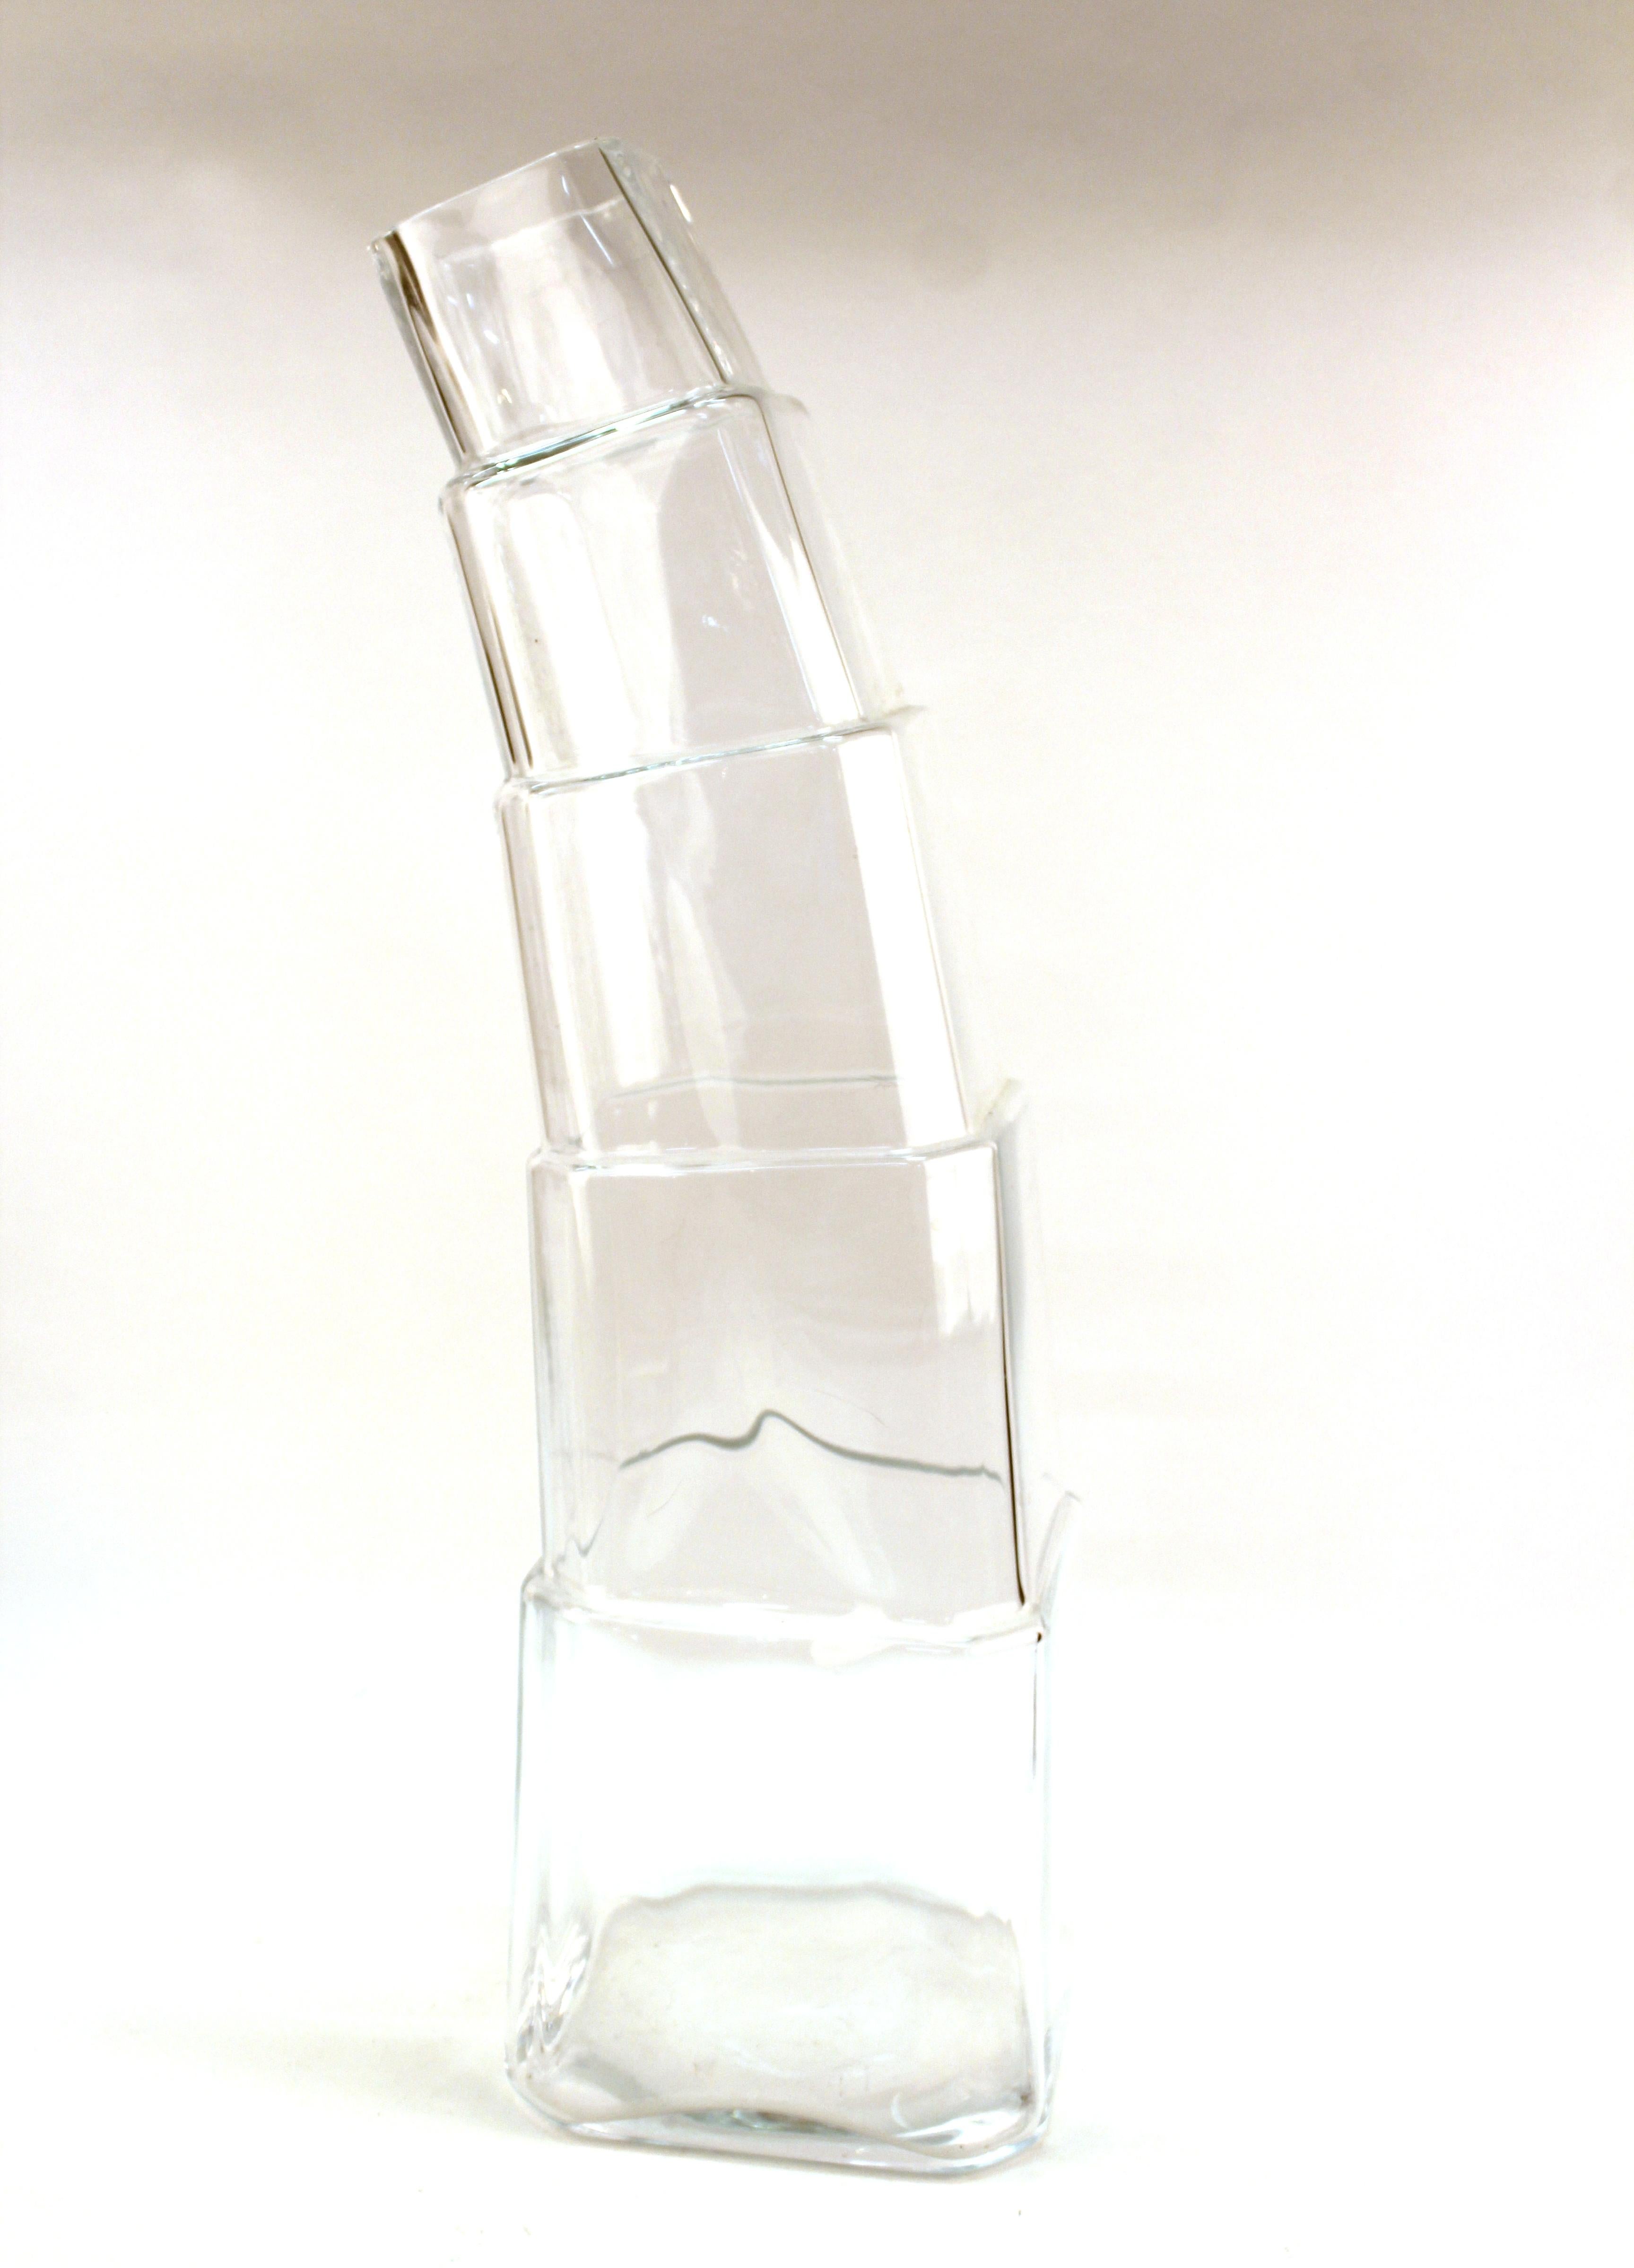 Modern clear glass vase designed by Denizli with stacked elements leaning to one side. Made in the early 21st century. The piece is in great vintage condition with age-appropriate wear and use.